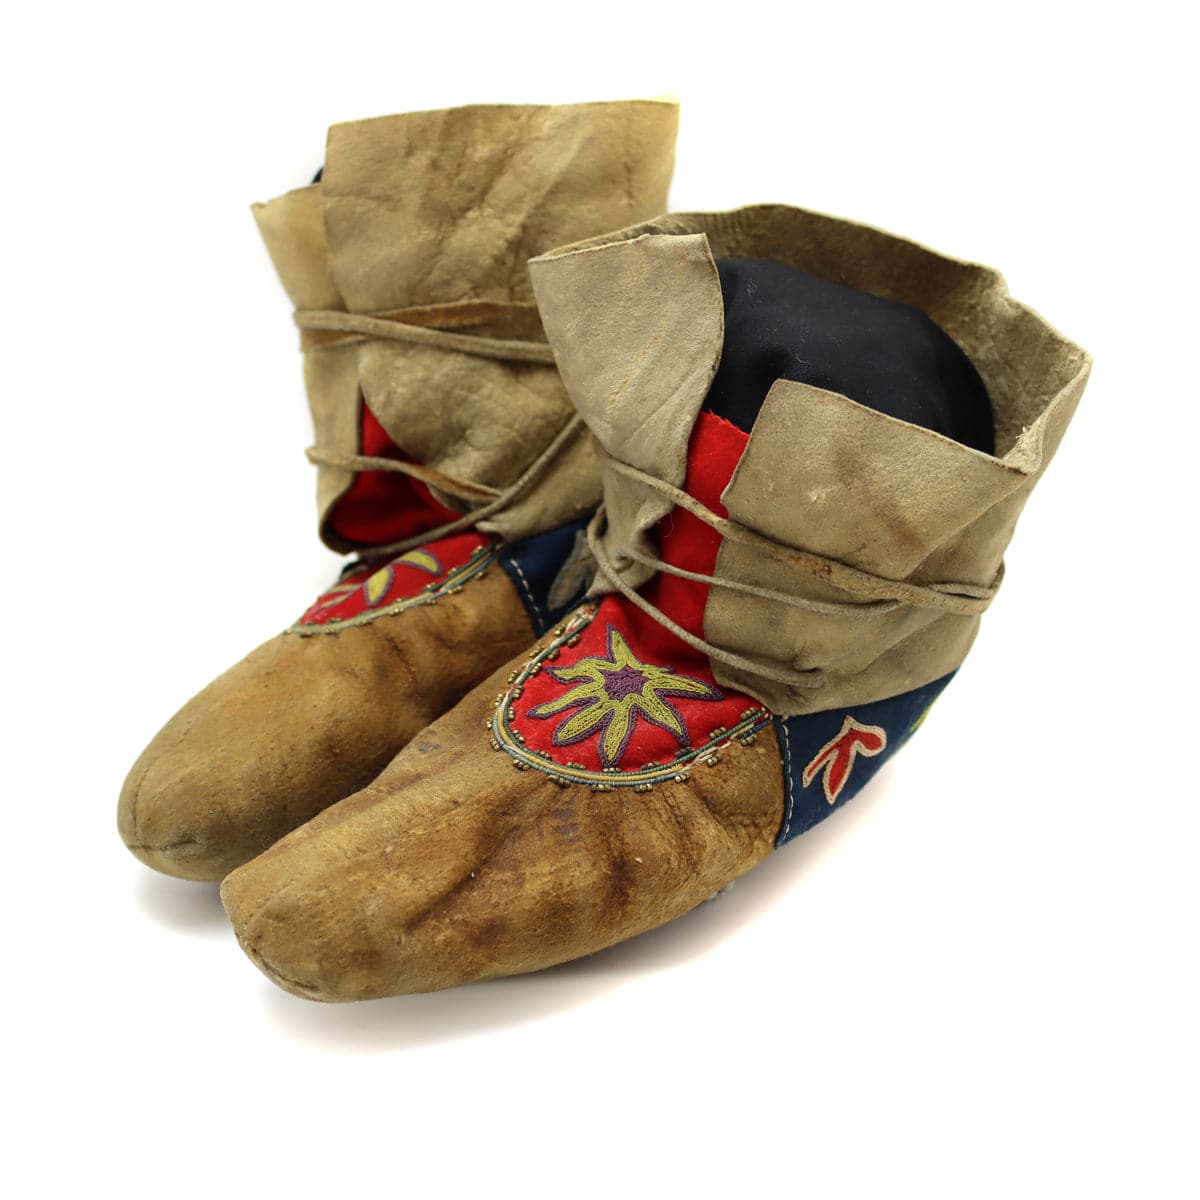 Athabaskan Leather, Trade Cloth, and Beaded Moccasins c. 1890-1900s, 6.75" x 9.5" (DW92323A-0421-001)
